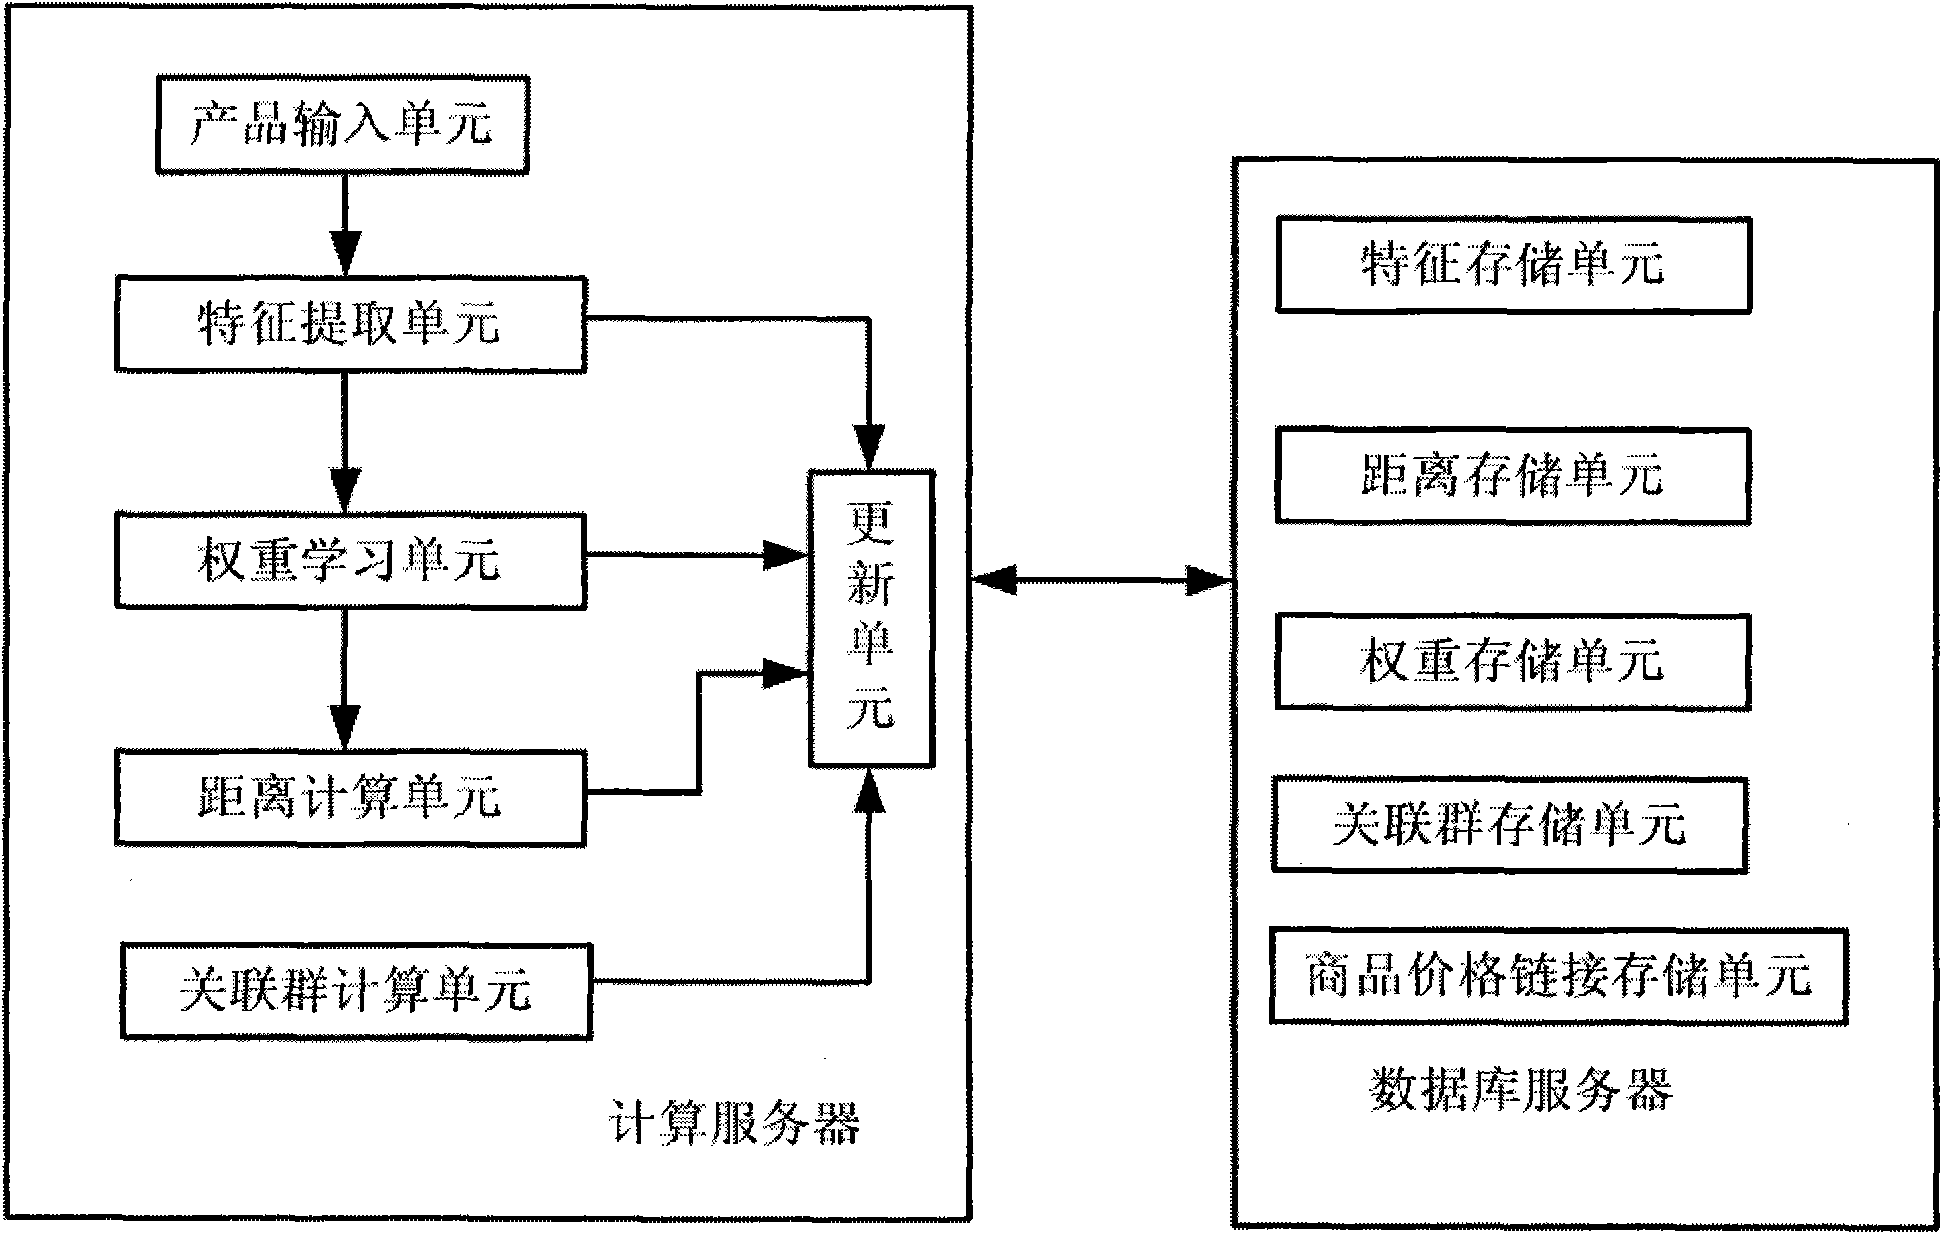 Picture retrieving method of network shopping guiding method